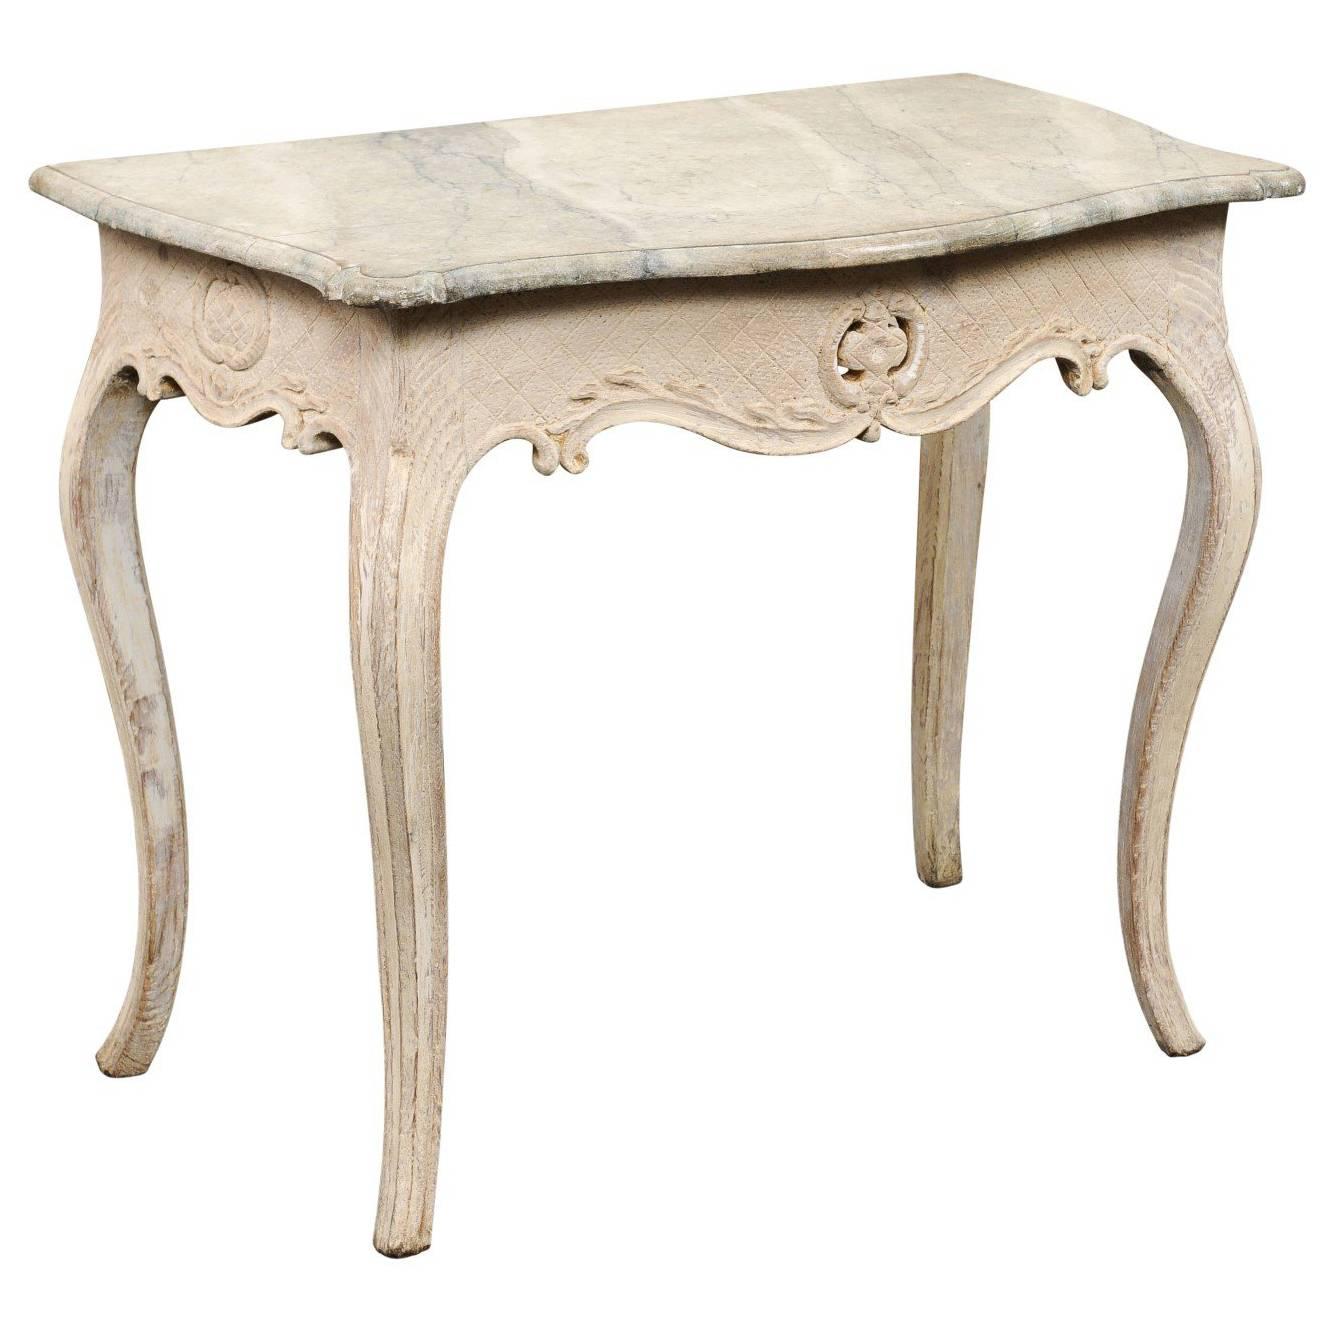 18th Century Swedish Wood & Hand-Painted Faux Marble-Top Cream Color Side Table